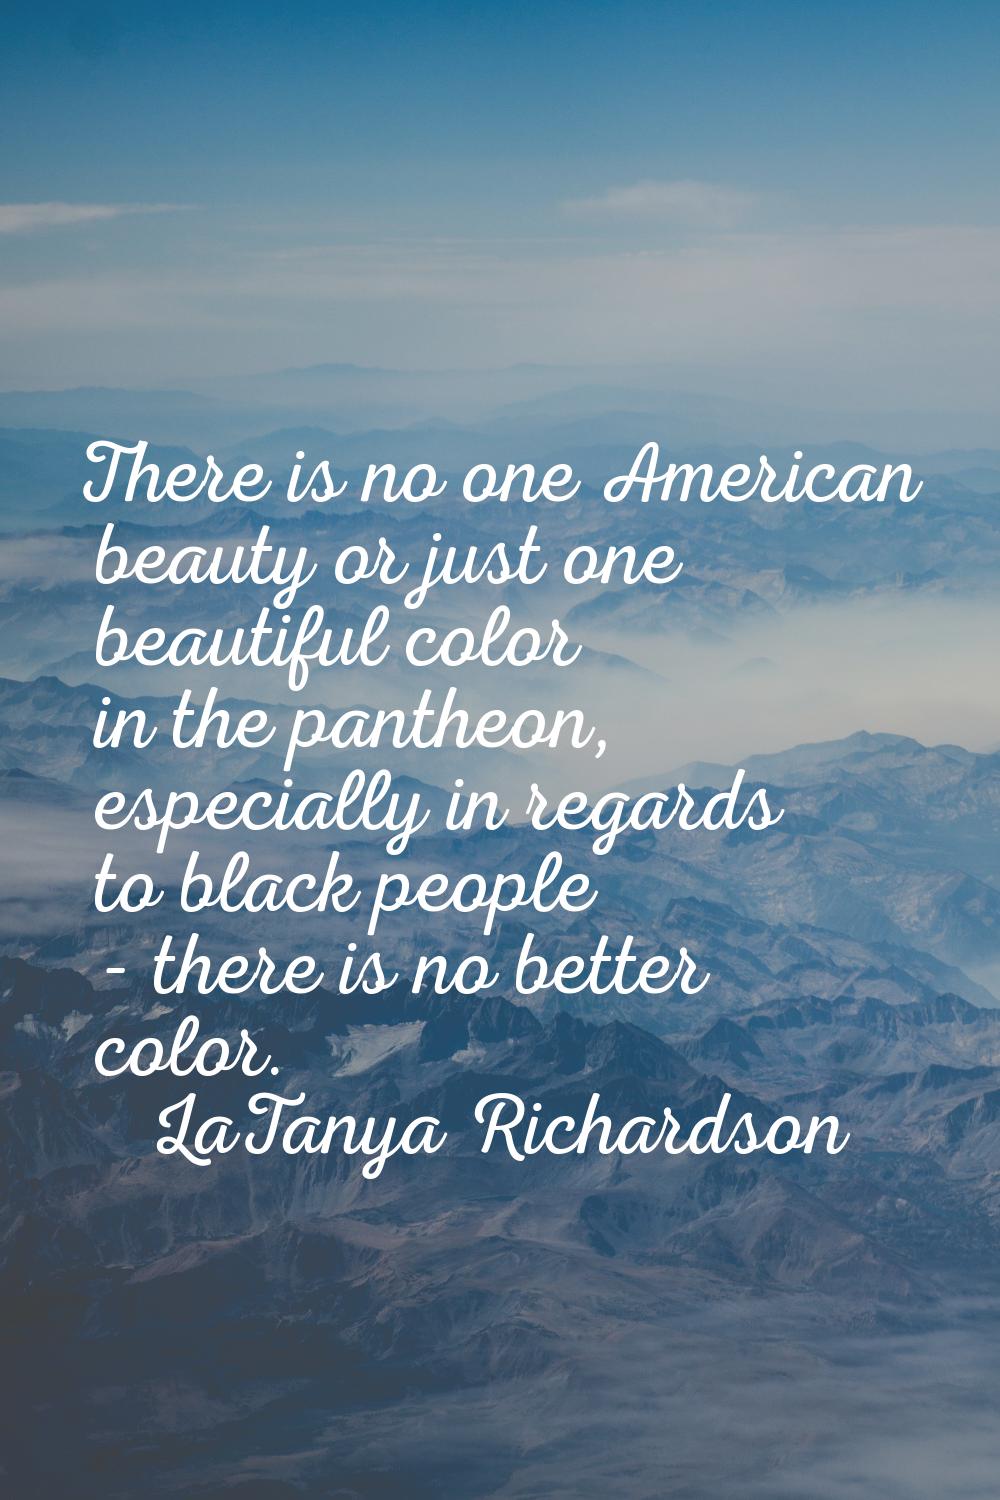 There is no one American beauty or just one beautiful color in the pantheon, especially in regards 